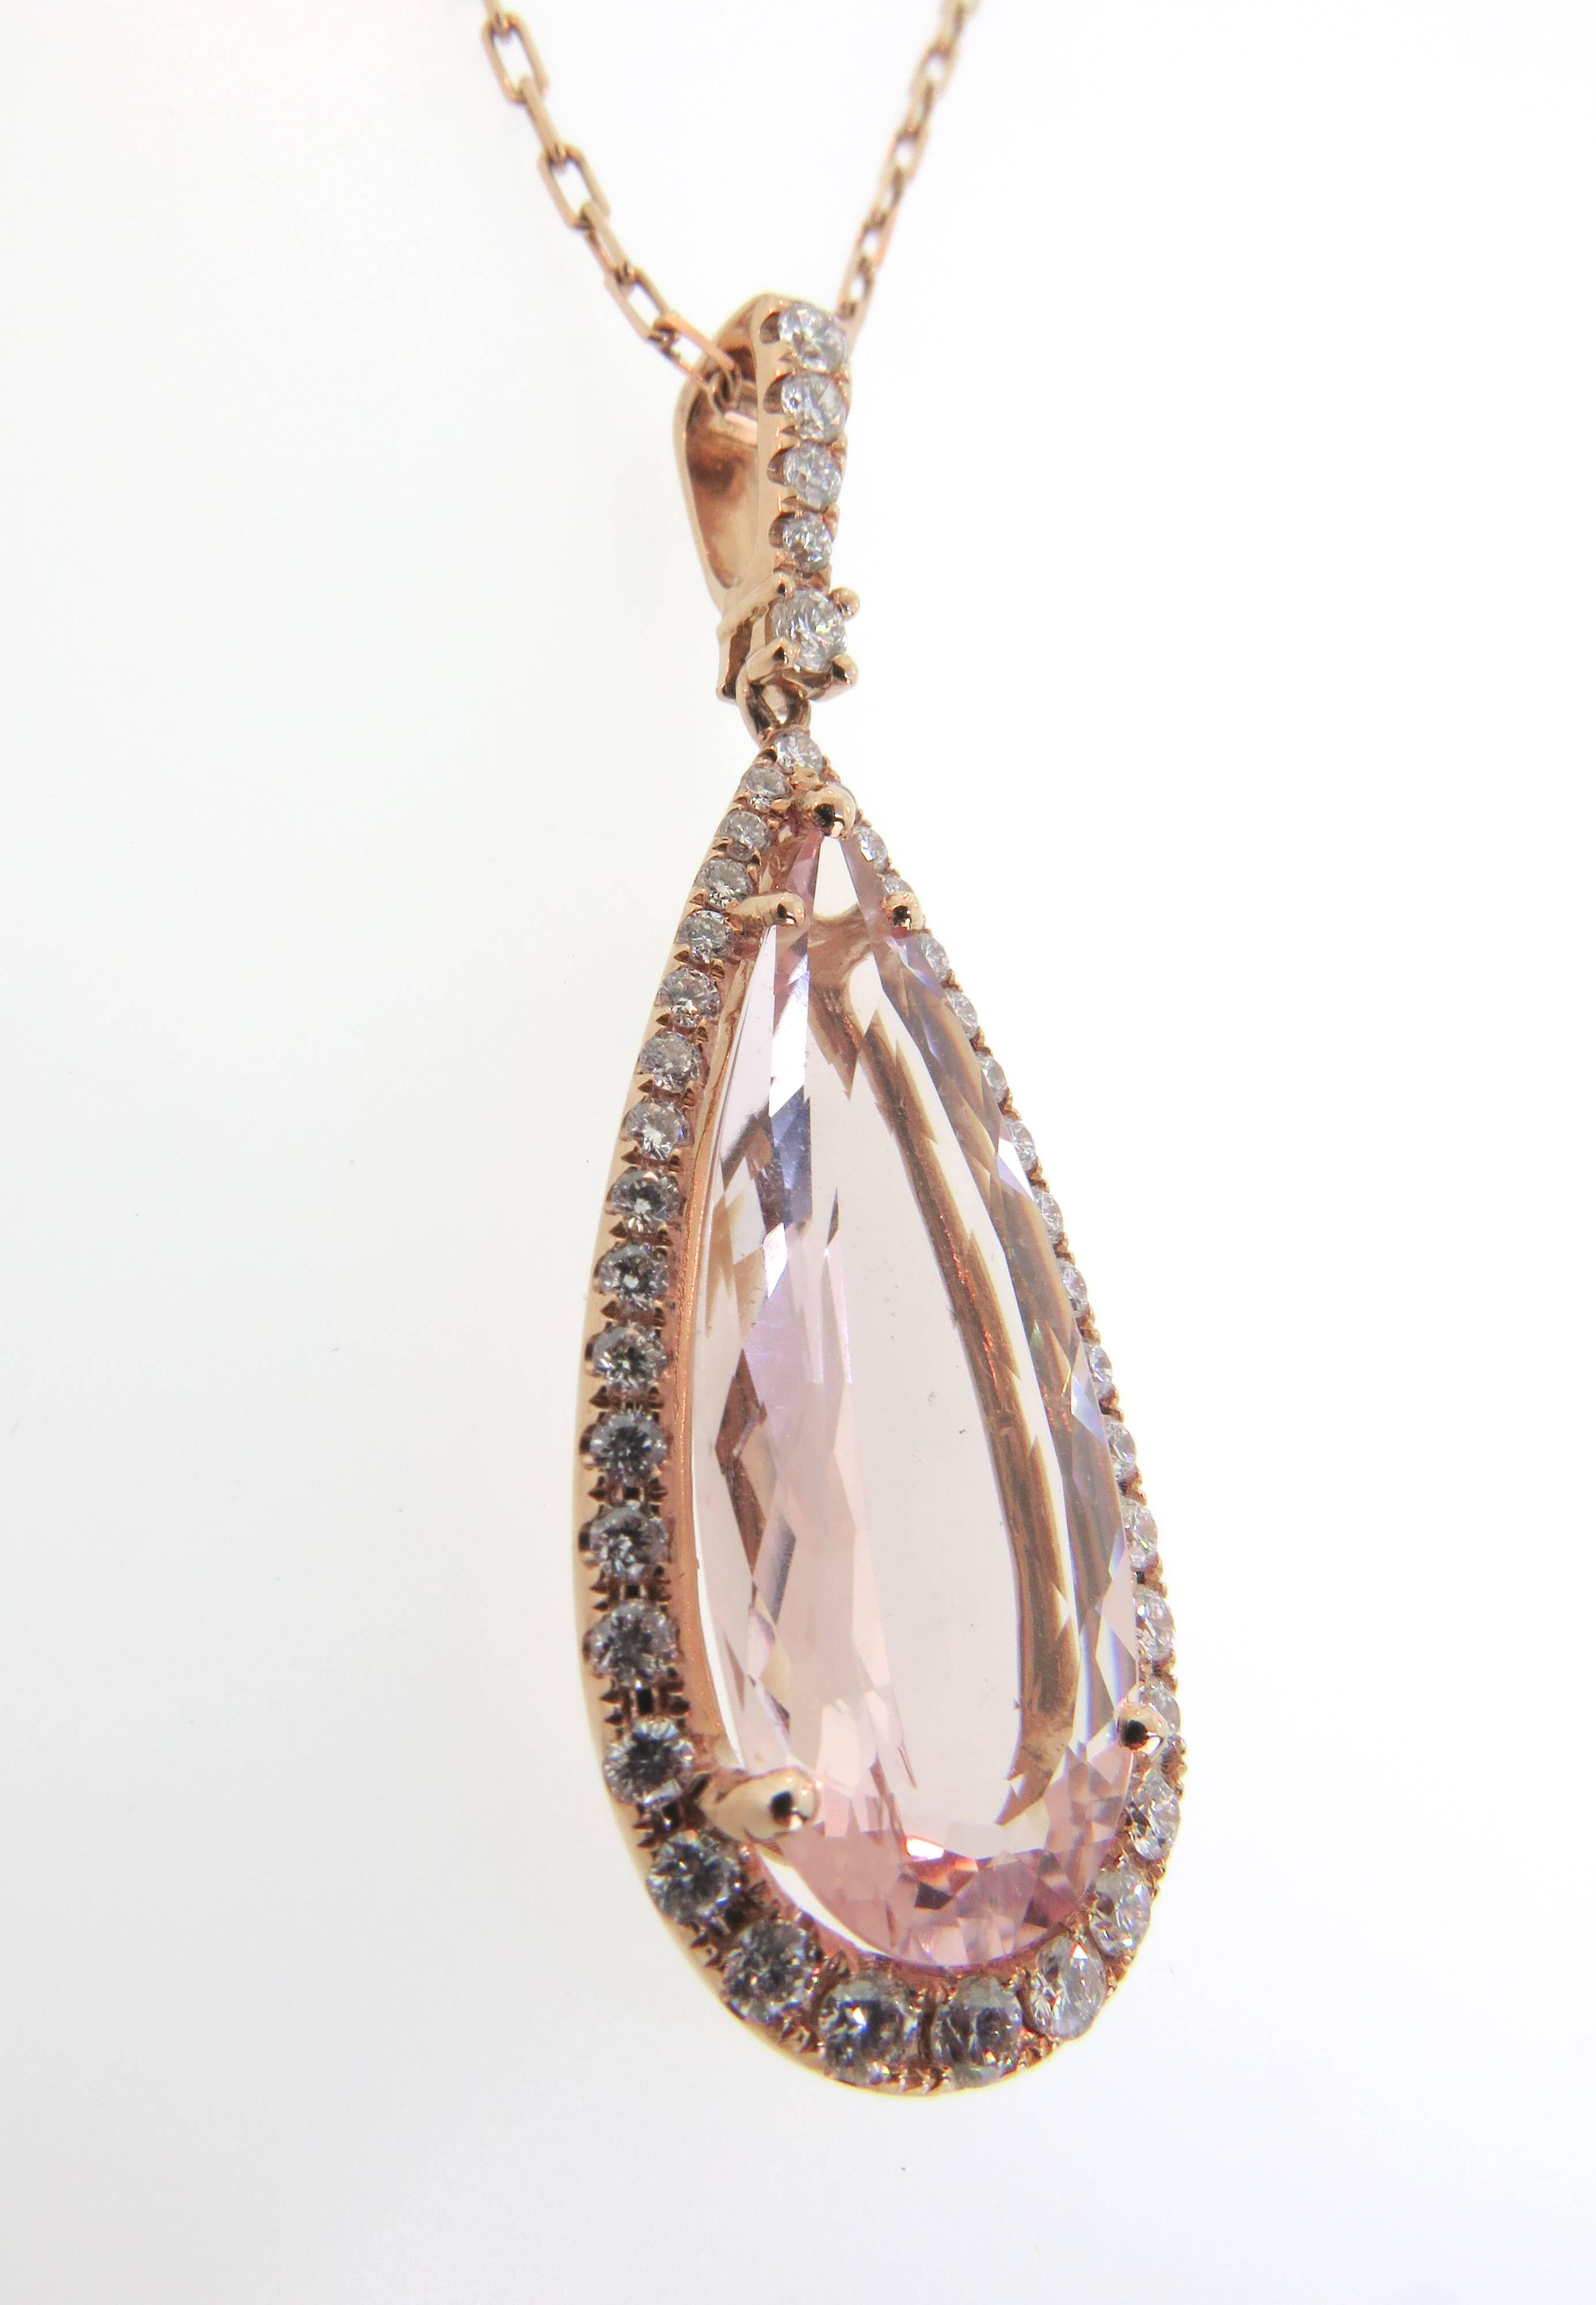 Gorgeous 8.72 carat elongated pear shaped Pink morganite surrounded by 41 dazzling white diamonds in this refreshingly beautiful pendant, suspended by an 18K rose gold chain 24 inches long. 

